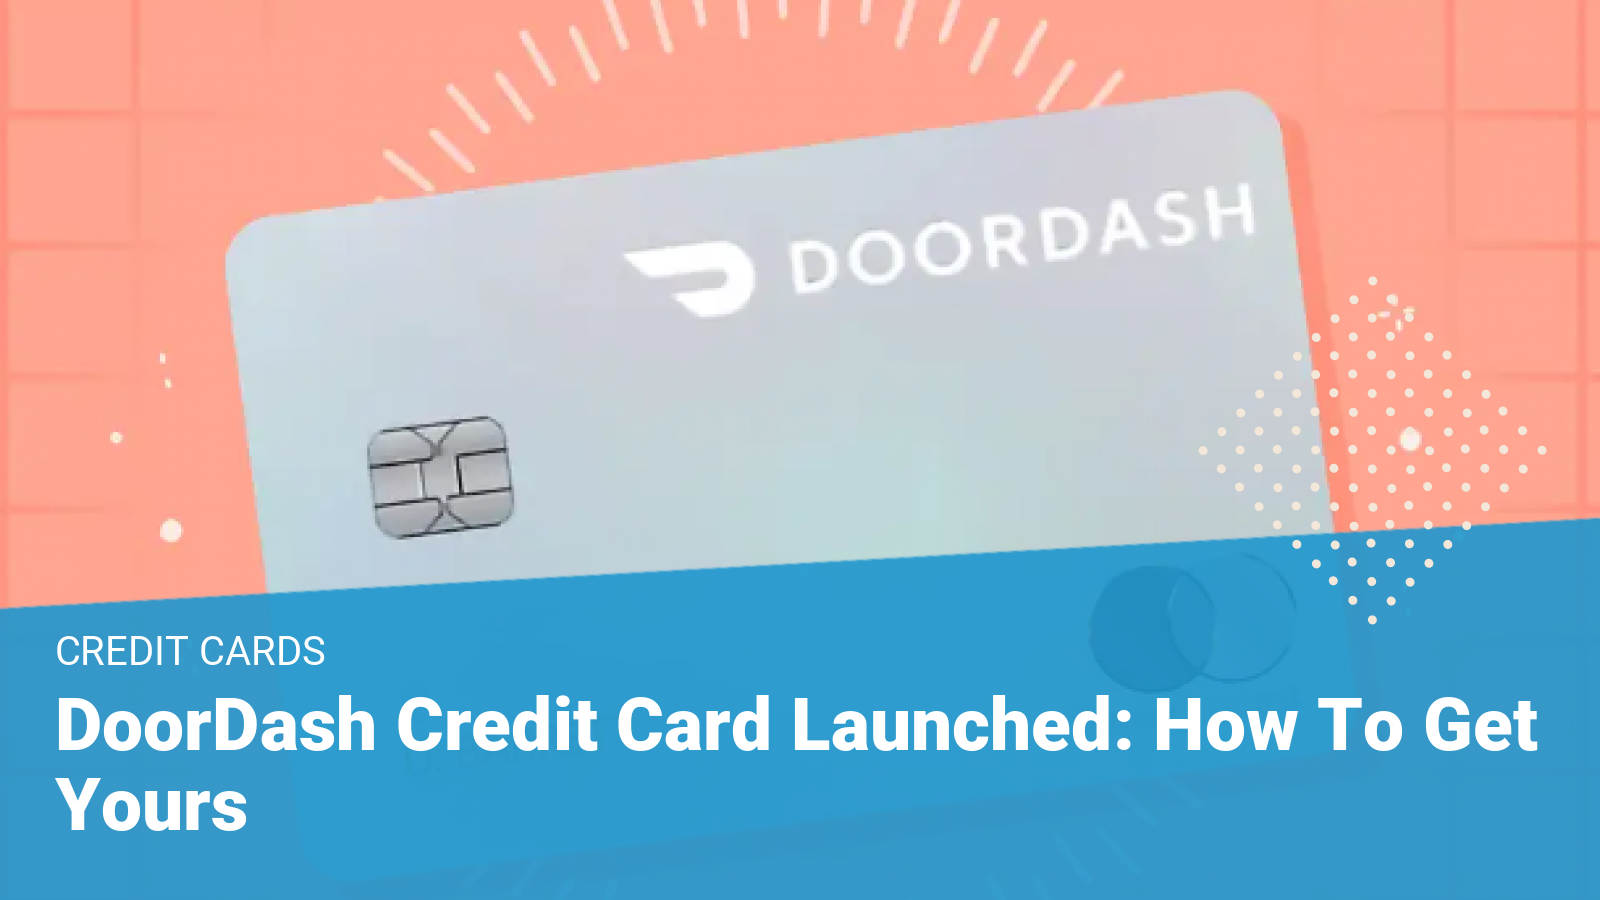 DoorDash Credit Card Launched How To Get Yours